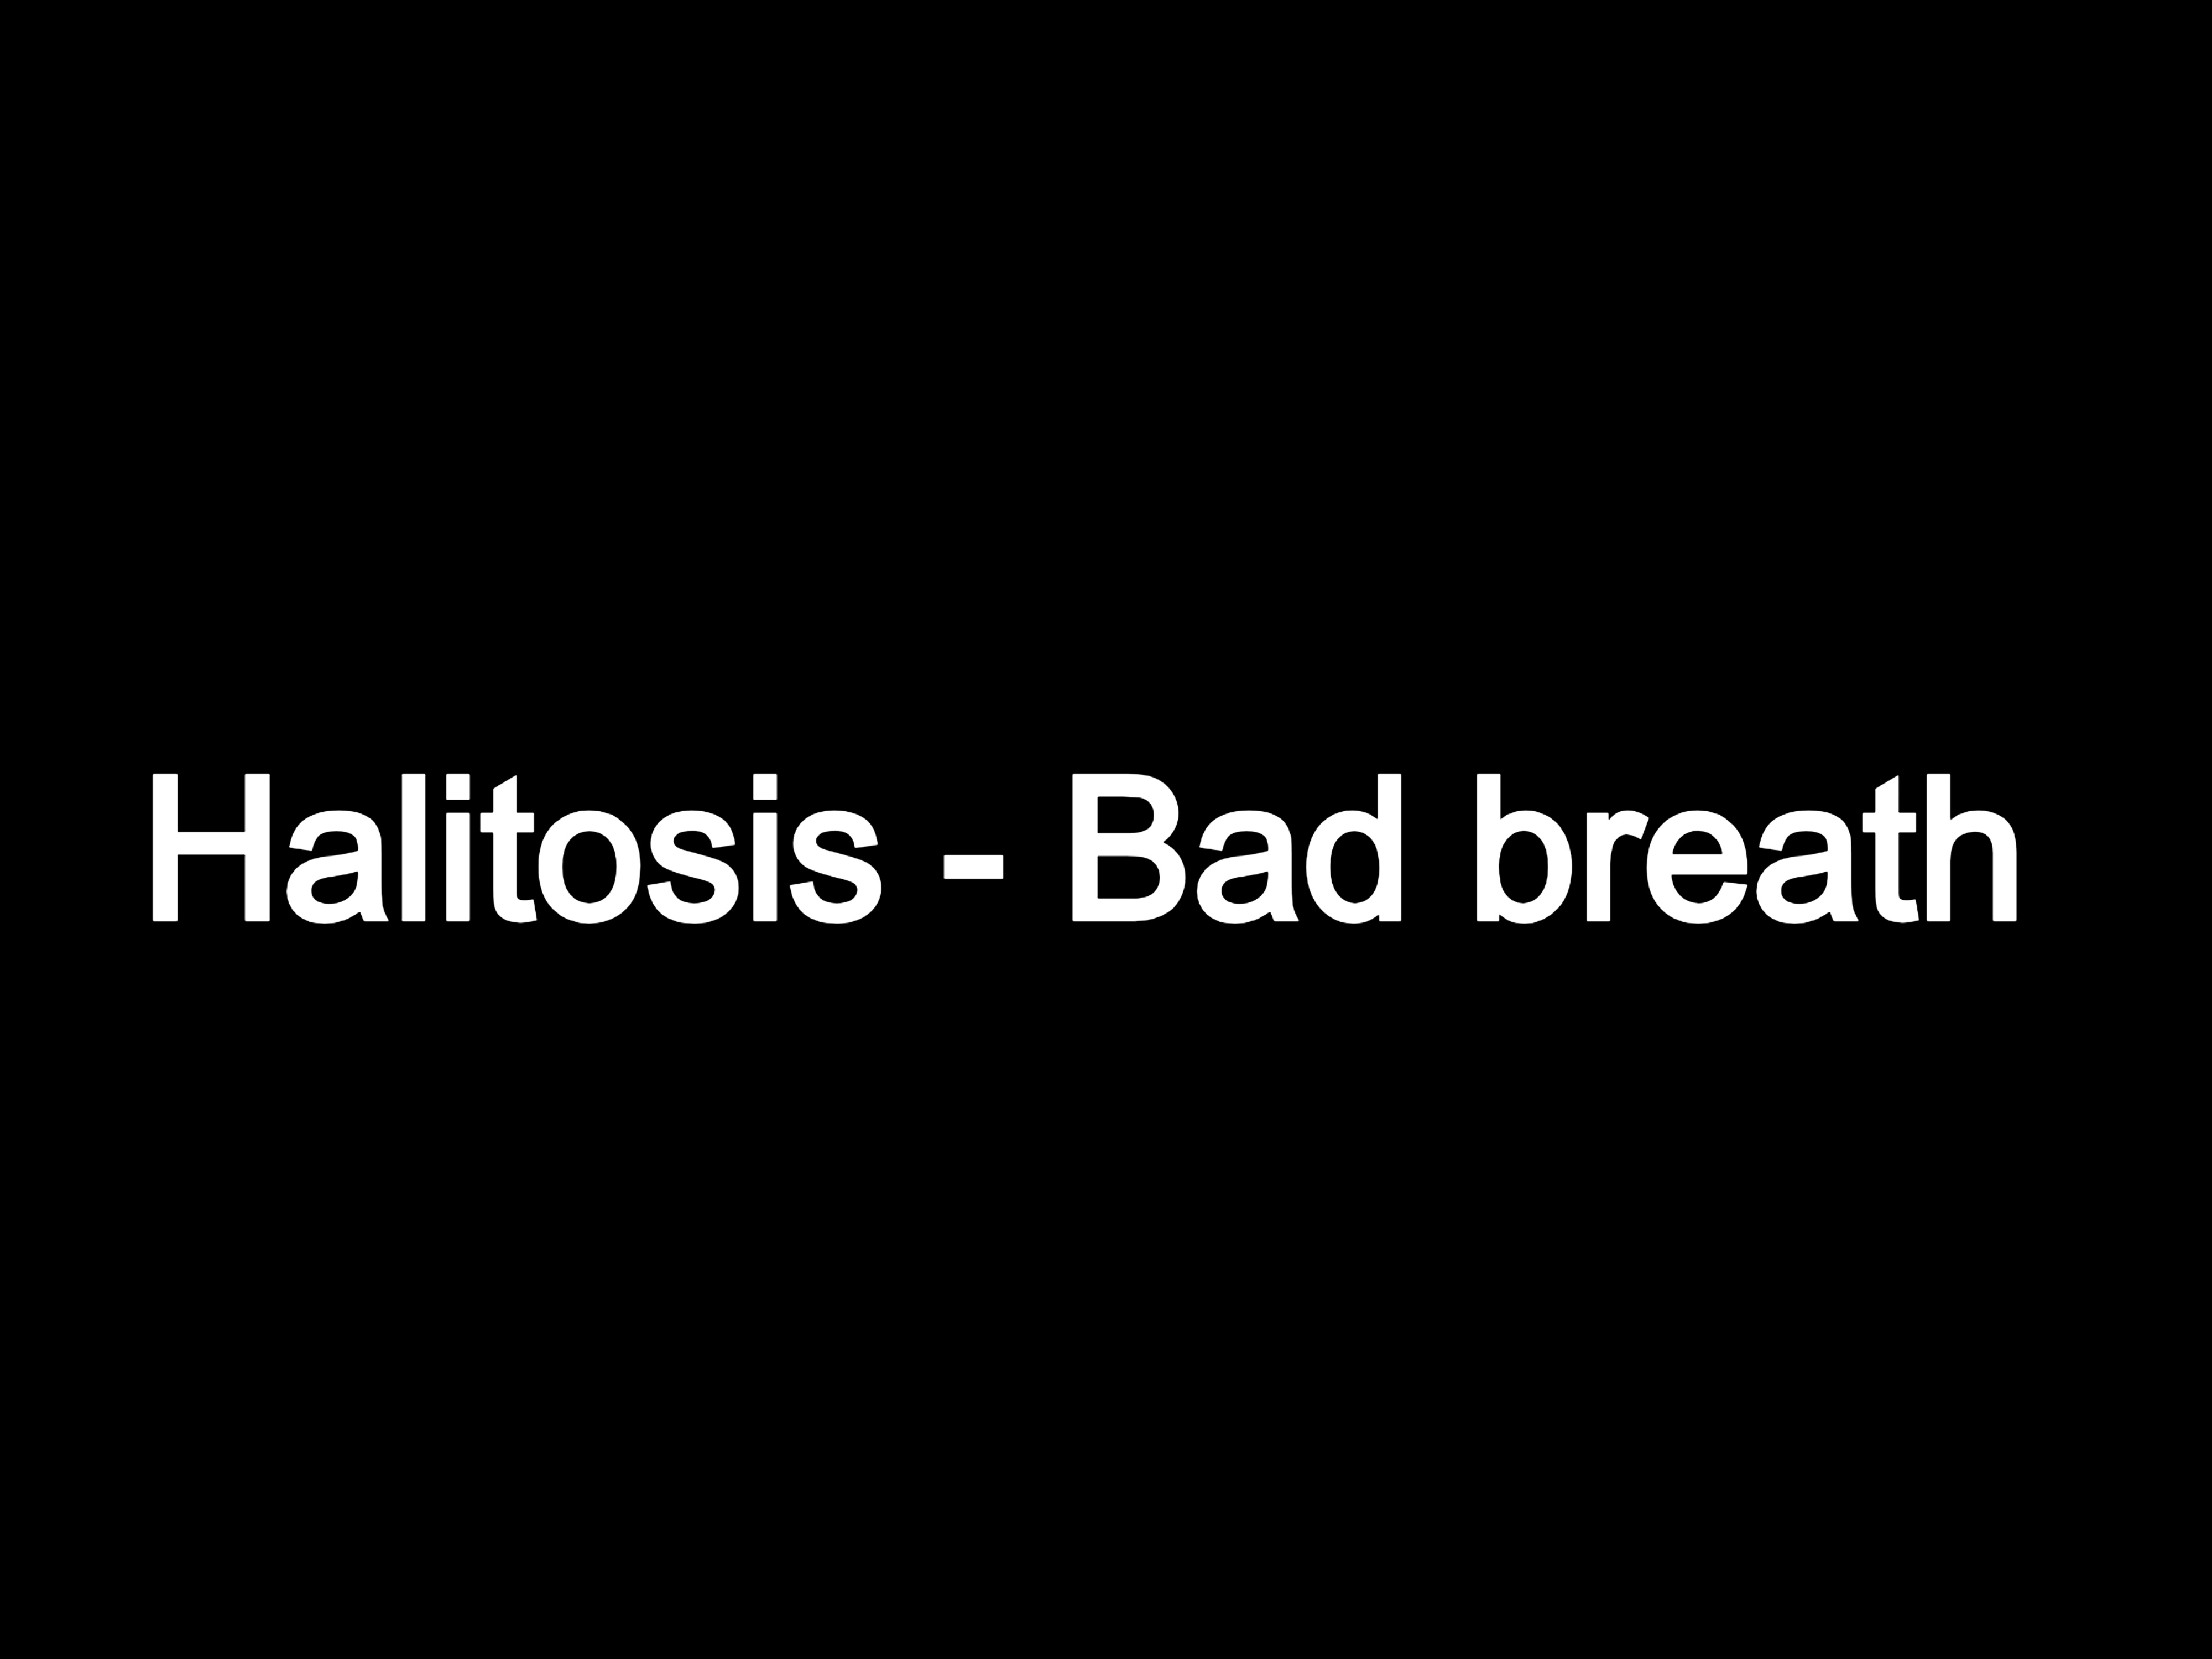 Halitosis - Bad breath - Bad odor from mouth